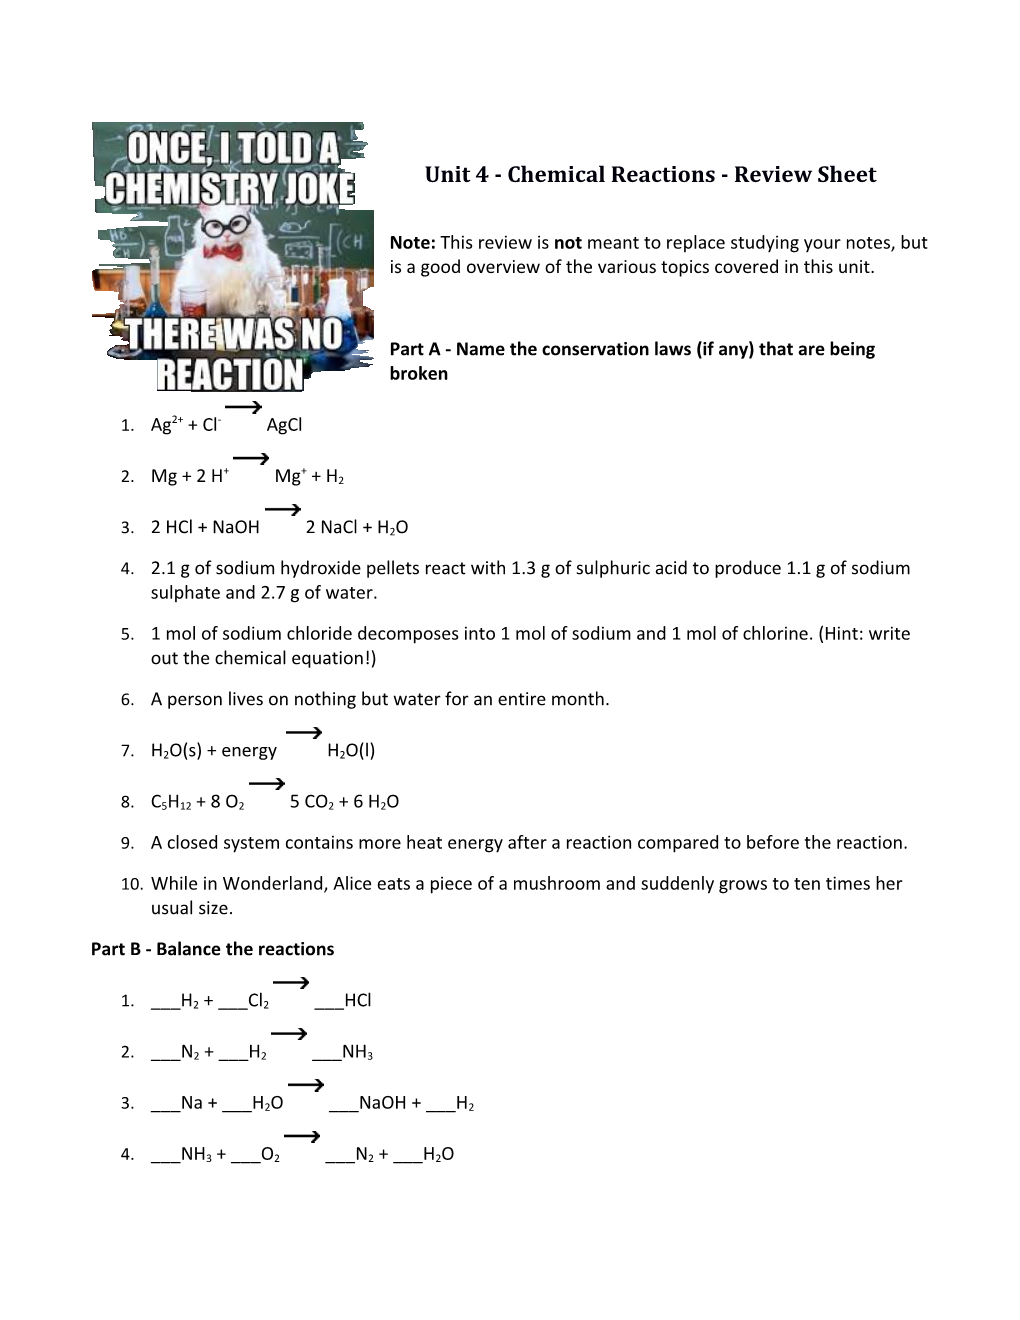 Unit 4 - Chemical Reactions - Review Sheet